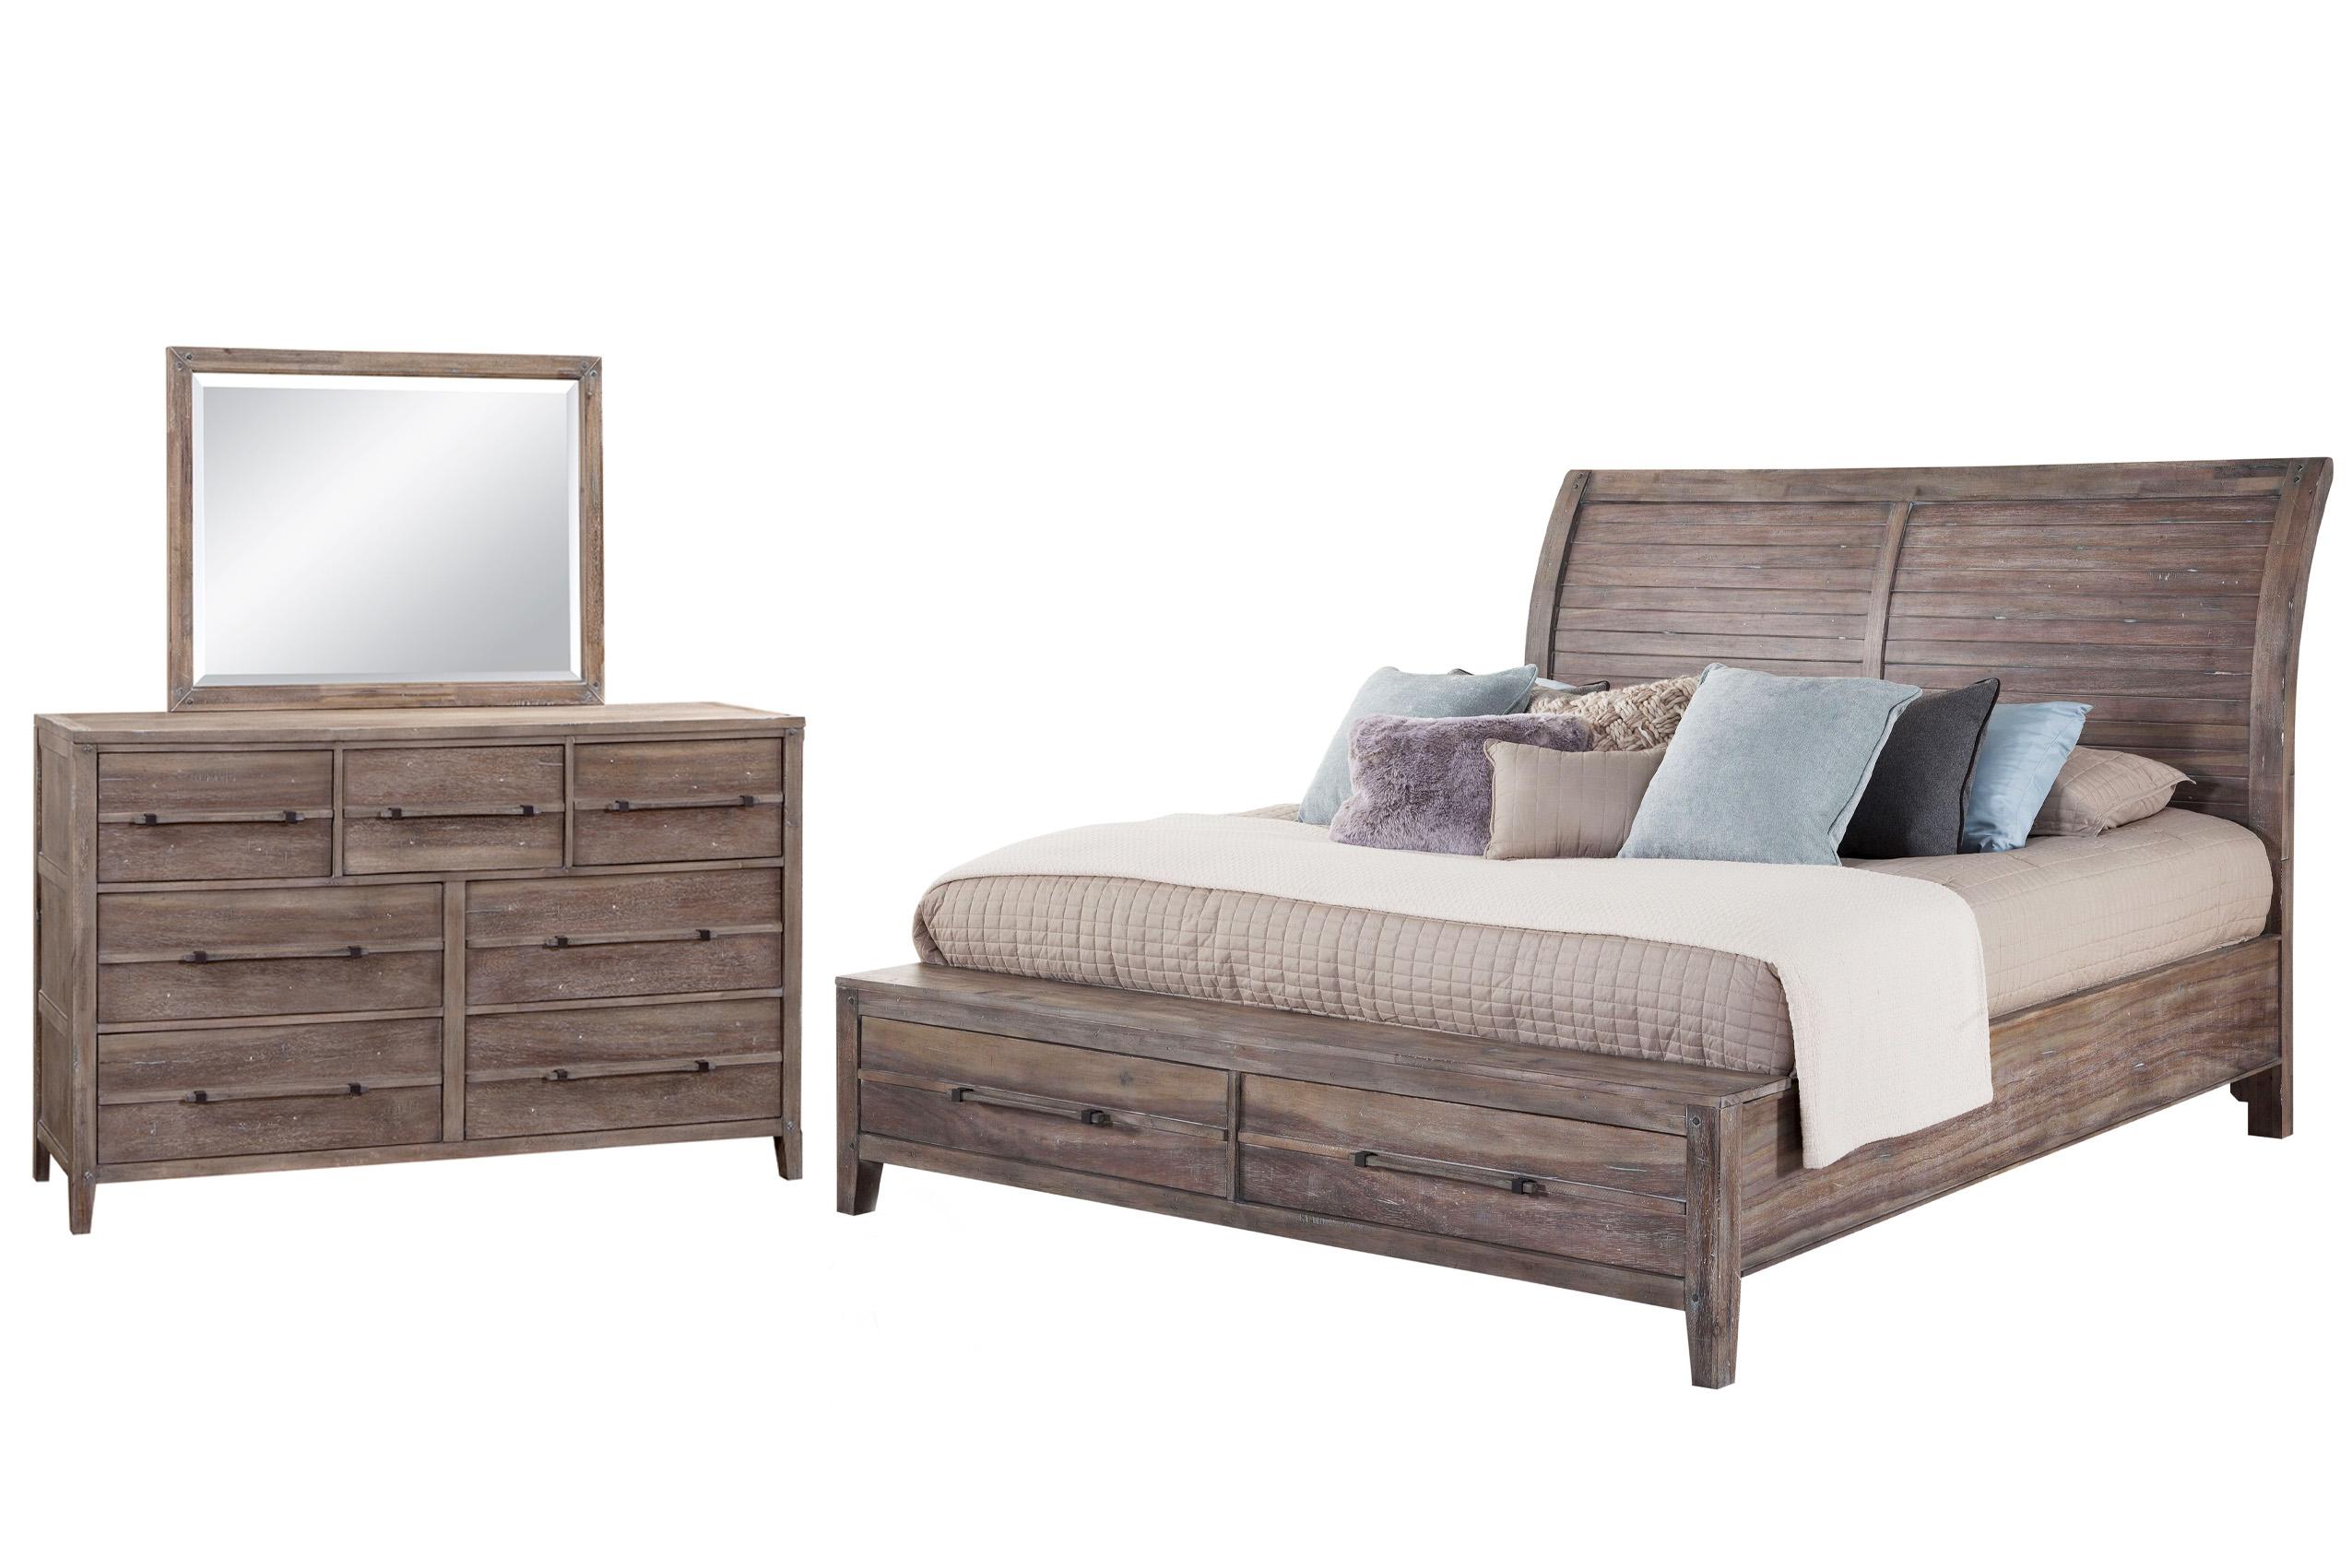 Classic, Traditional Sleigh Bedroom Set AURORA 2800-50SLES 2800-QSLST-3PC in Driftwood, Gray 